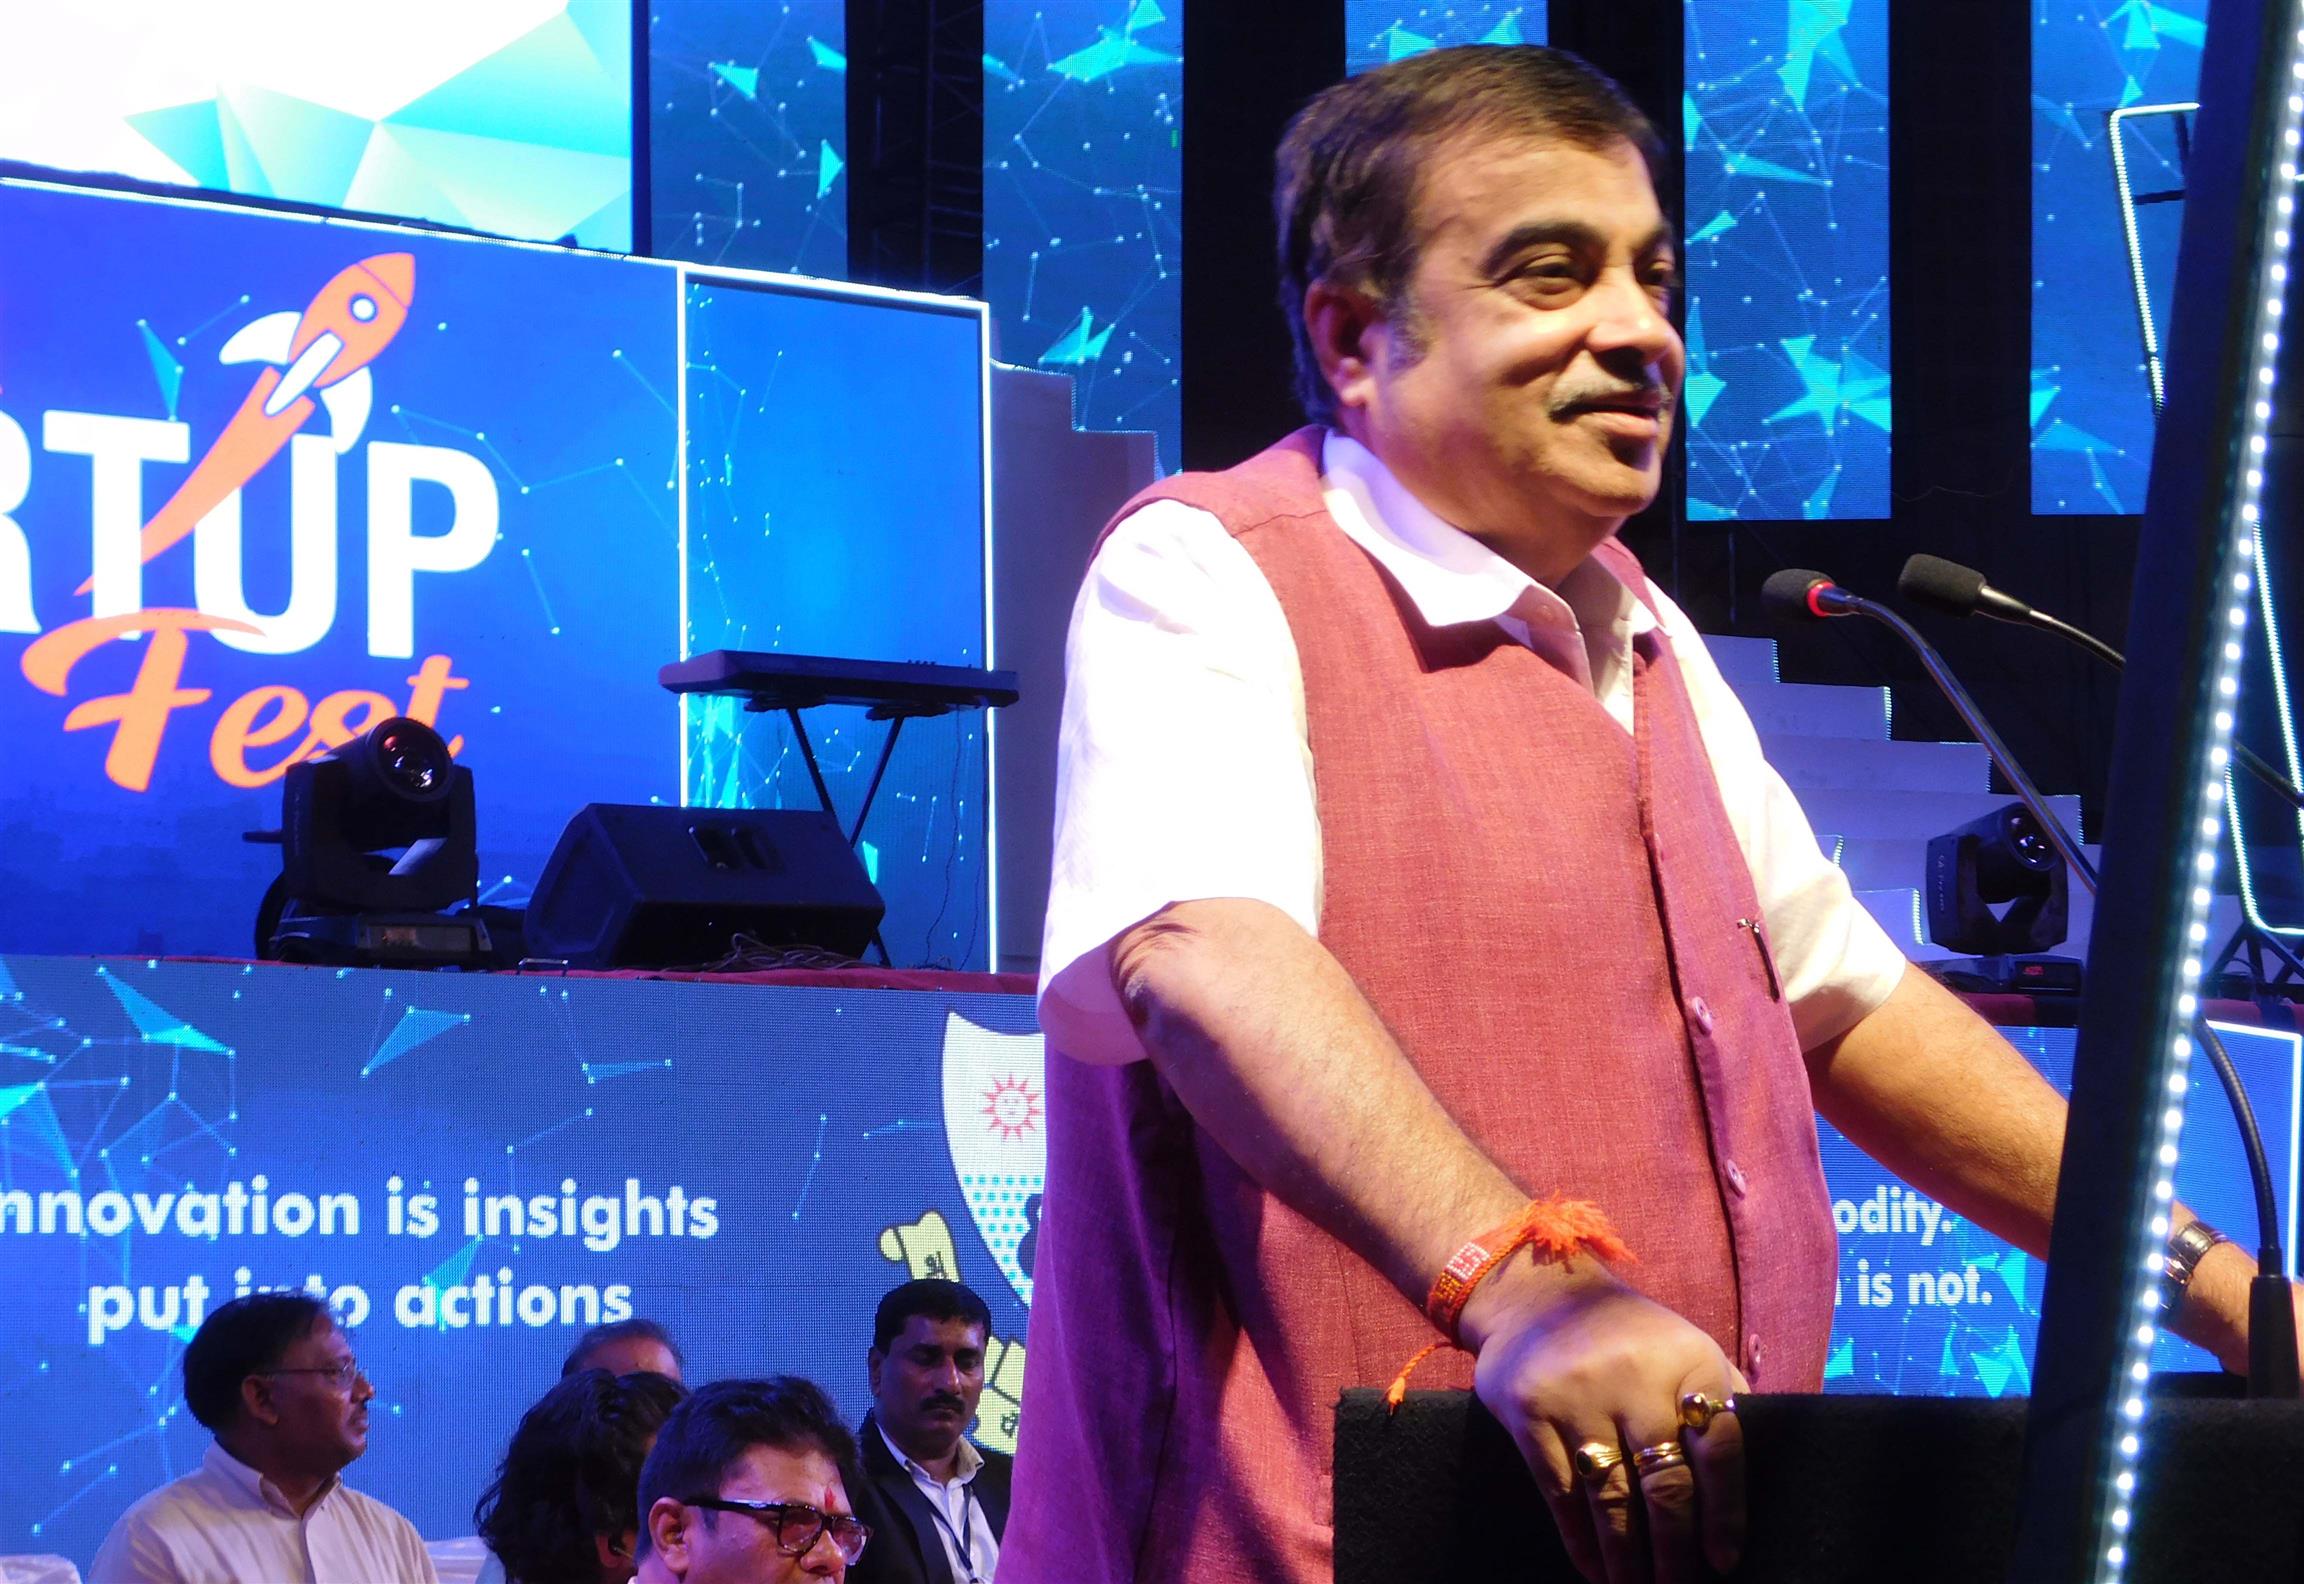 The Union Minister for Road Transport & Highways and Micro, Small & Medium Enterprises, Shri Nitin Gadkari addressing on the occasion of  inauguration of Start up fest orgnised by Nagpur Municipal Corporation  in Nagpur  on  24 August 2019.